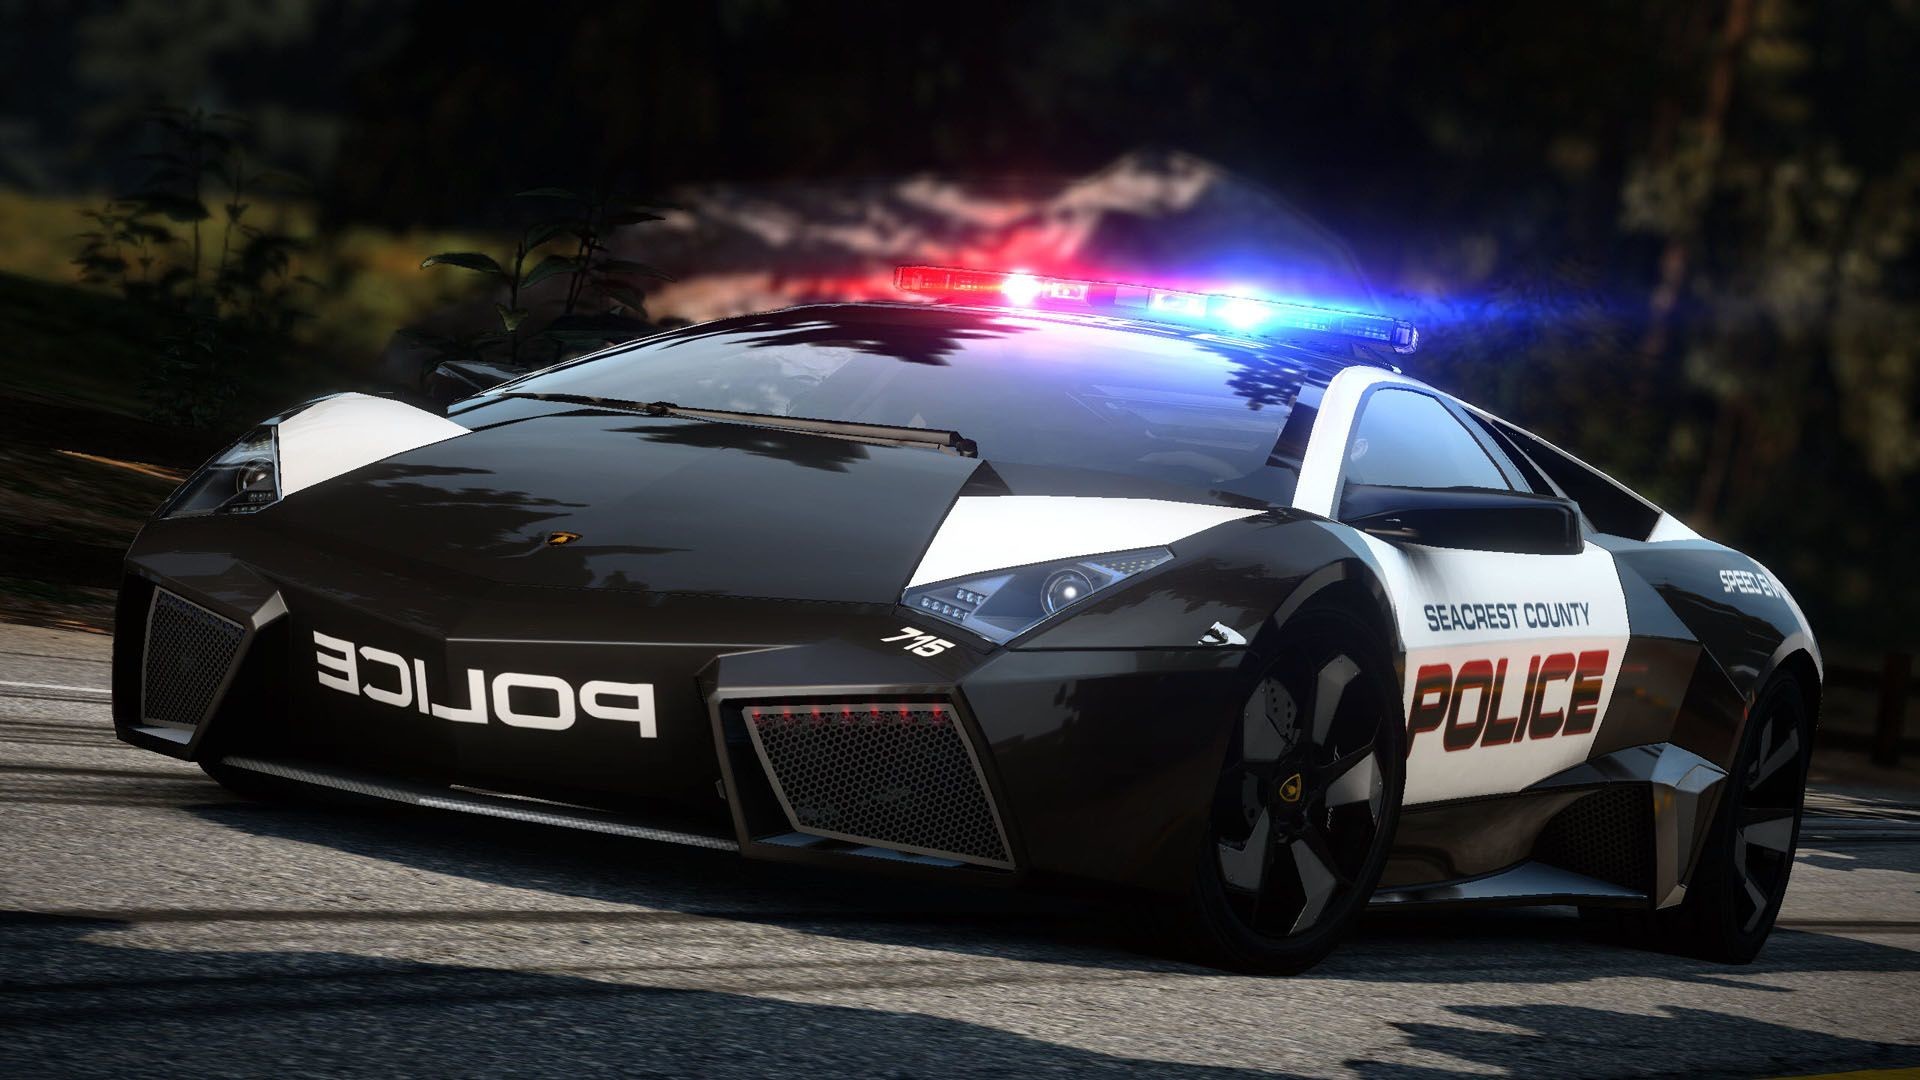 1920x1080 another pinner says: Lamborghini ReventÃ³n Police Interceptor. No doubt the  best reason to be a cop in Seacrest County. walpapers of cars | wallpaper  ...